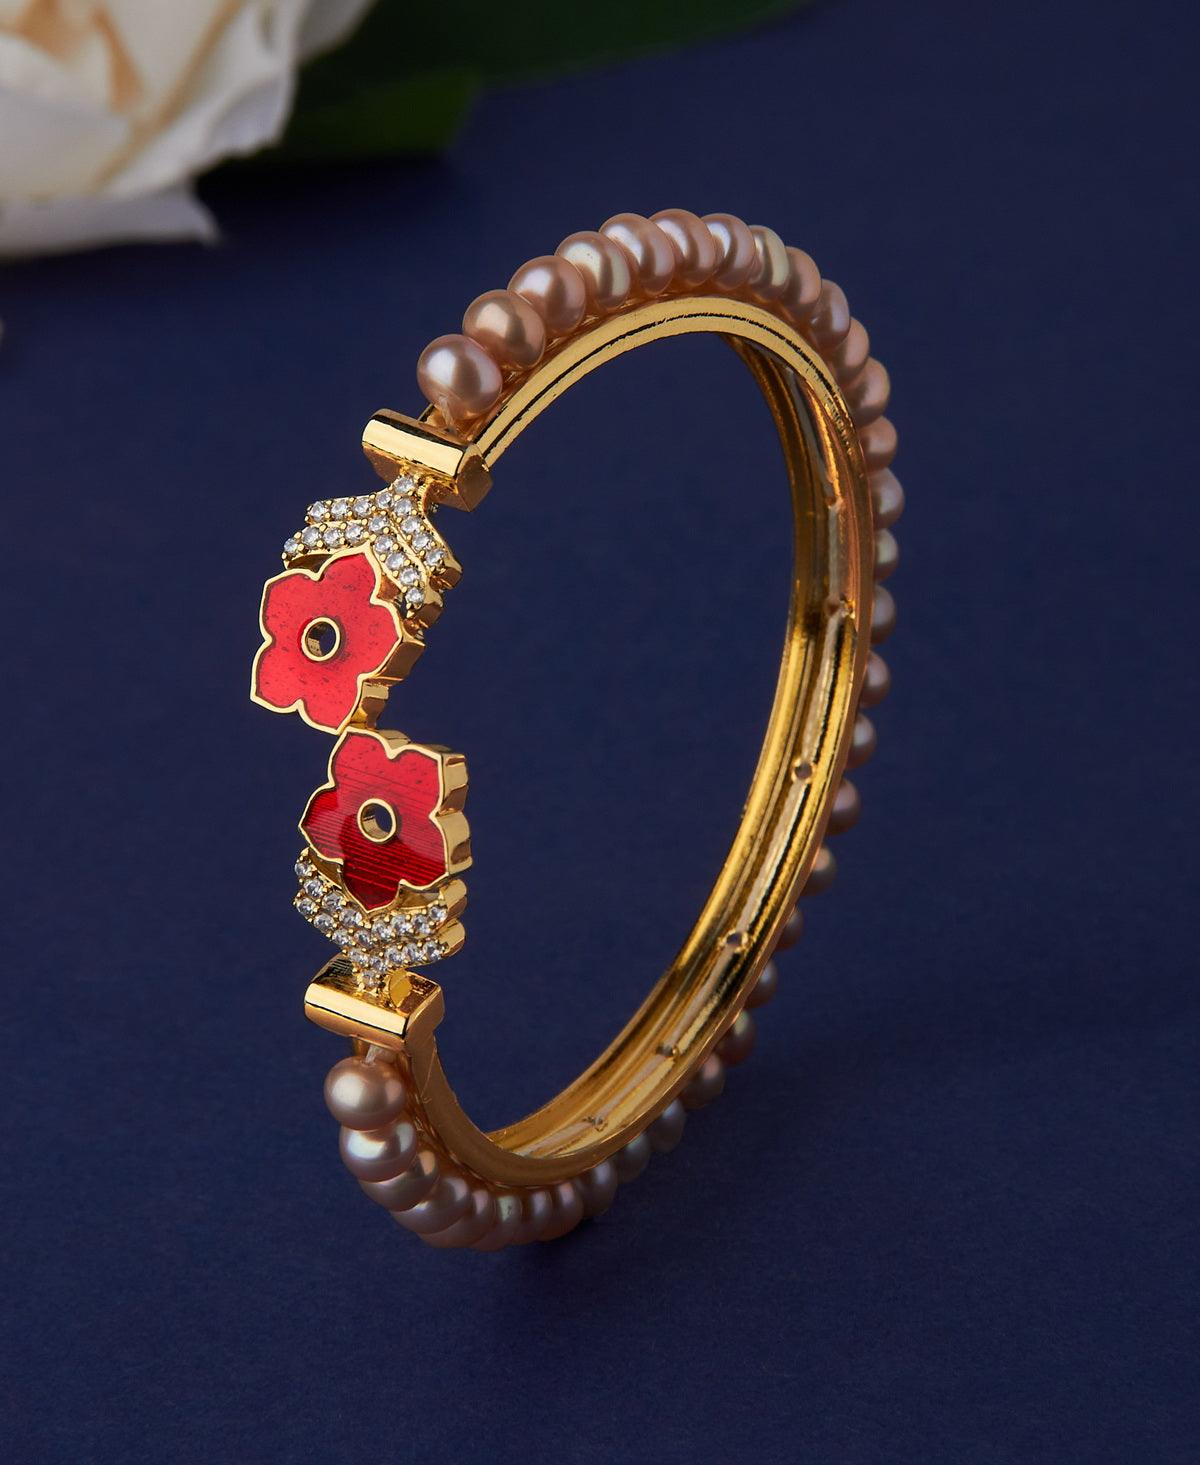 Floral Stone Studded Pearl Bangle - Chandrani Pearls